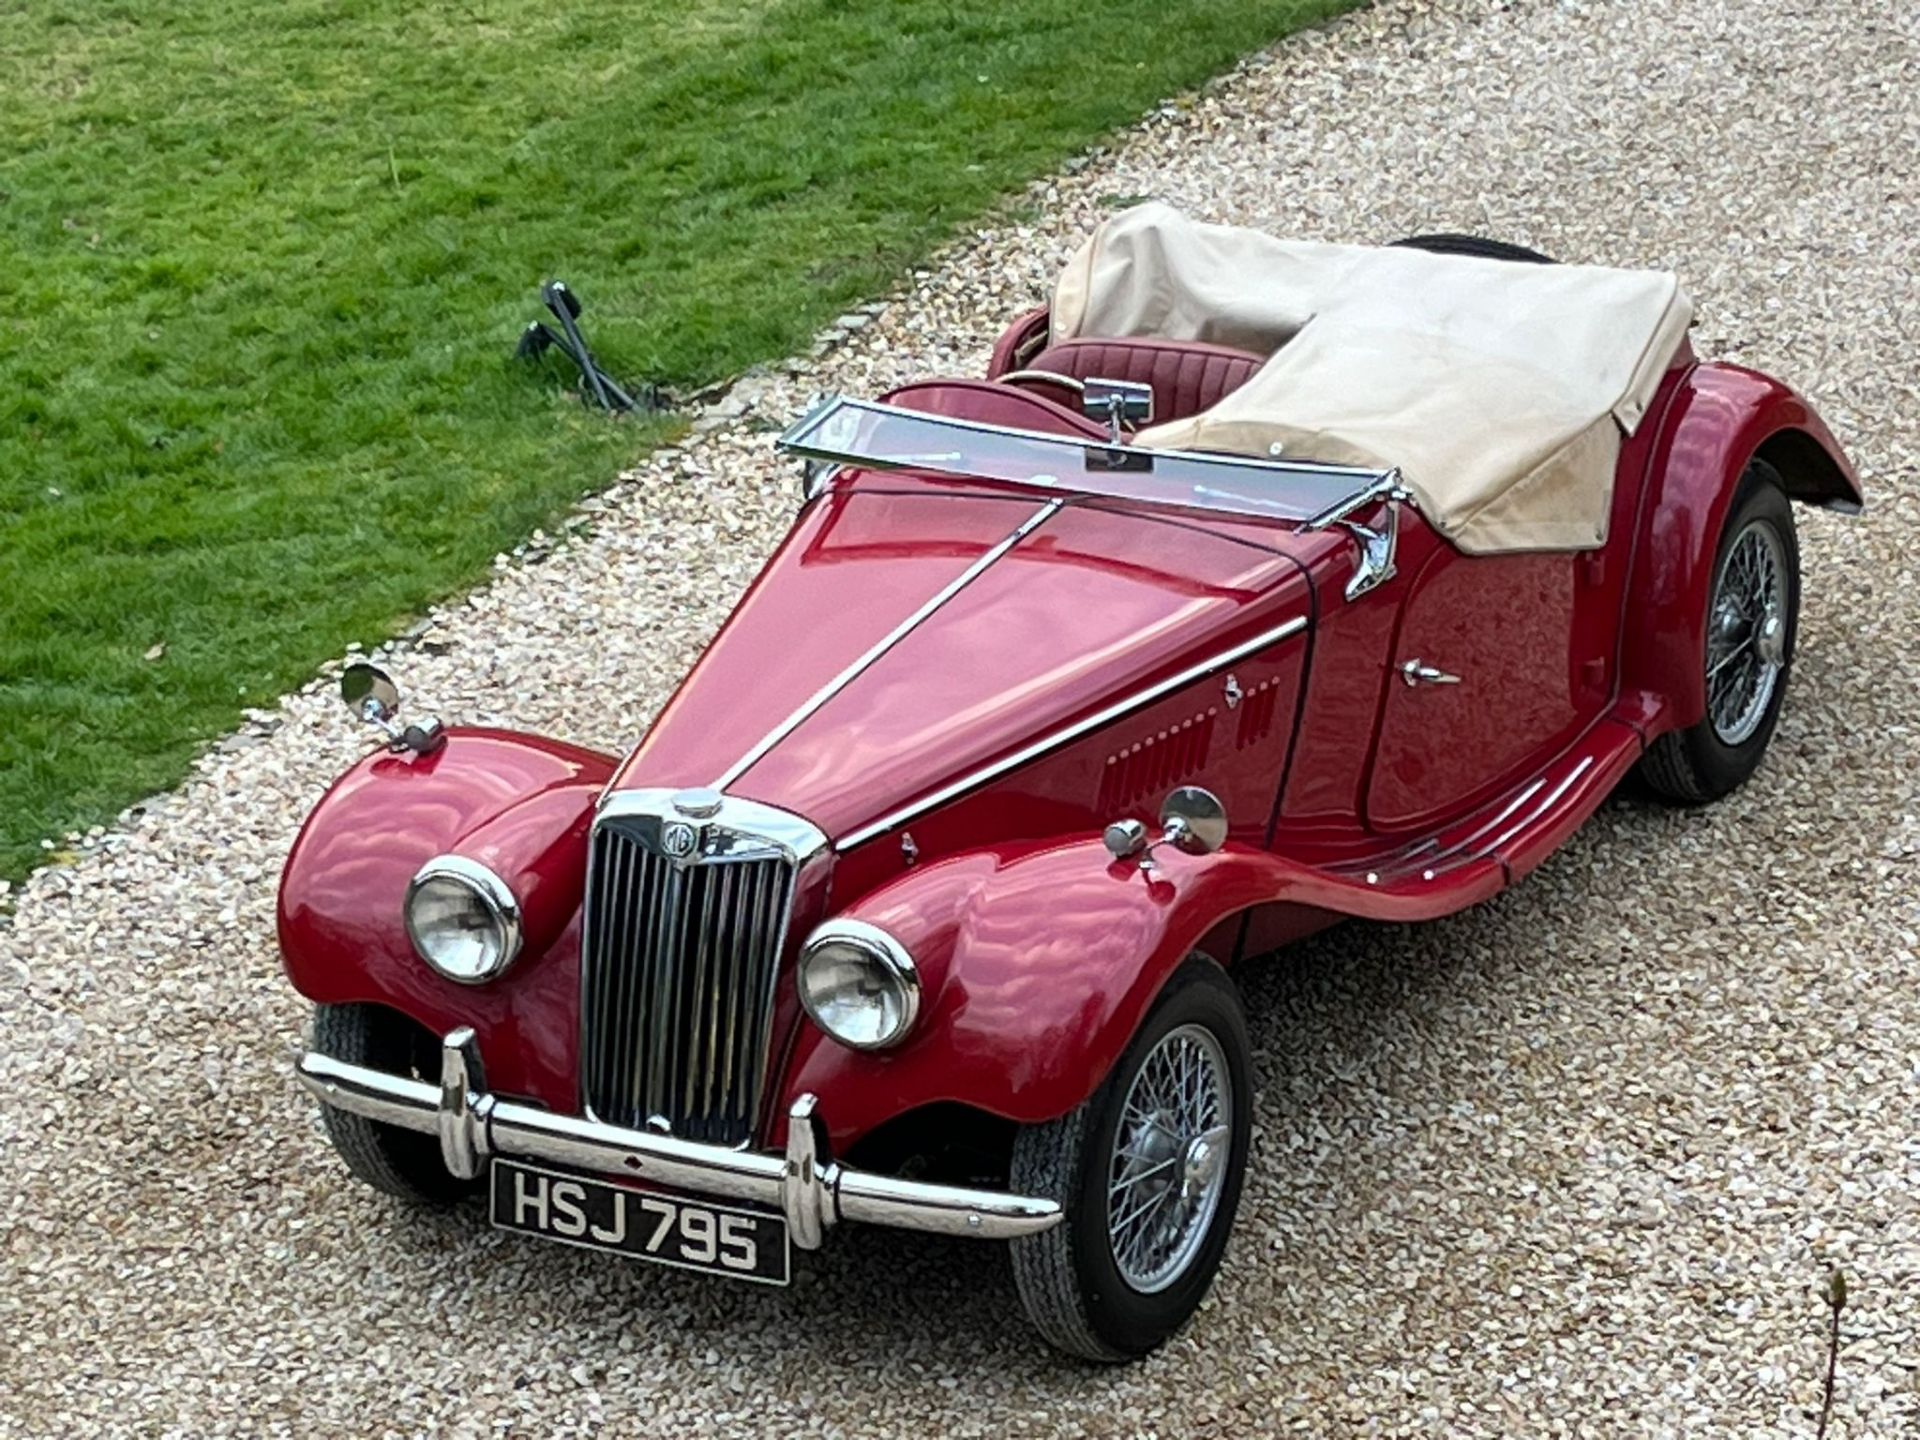 1953 MG TF with full restoration in 1998 - Image 6 of 26